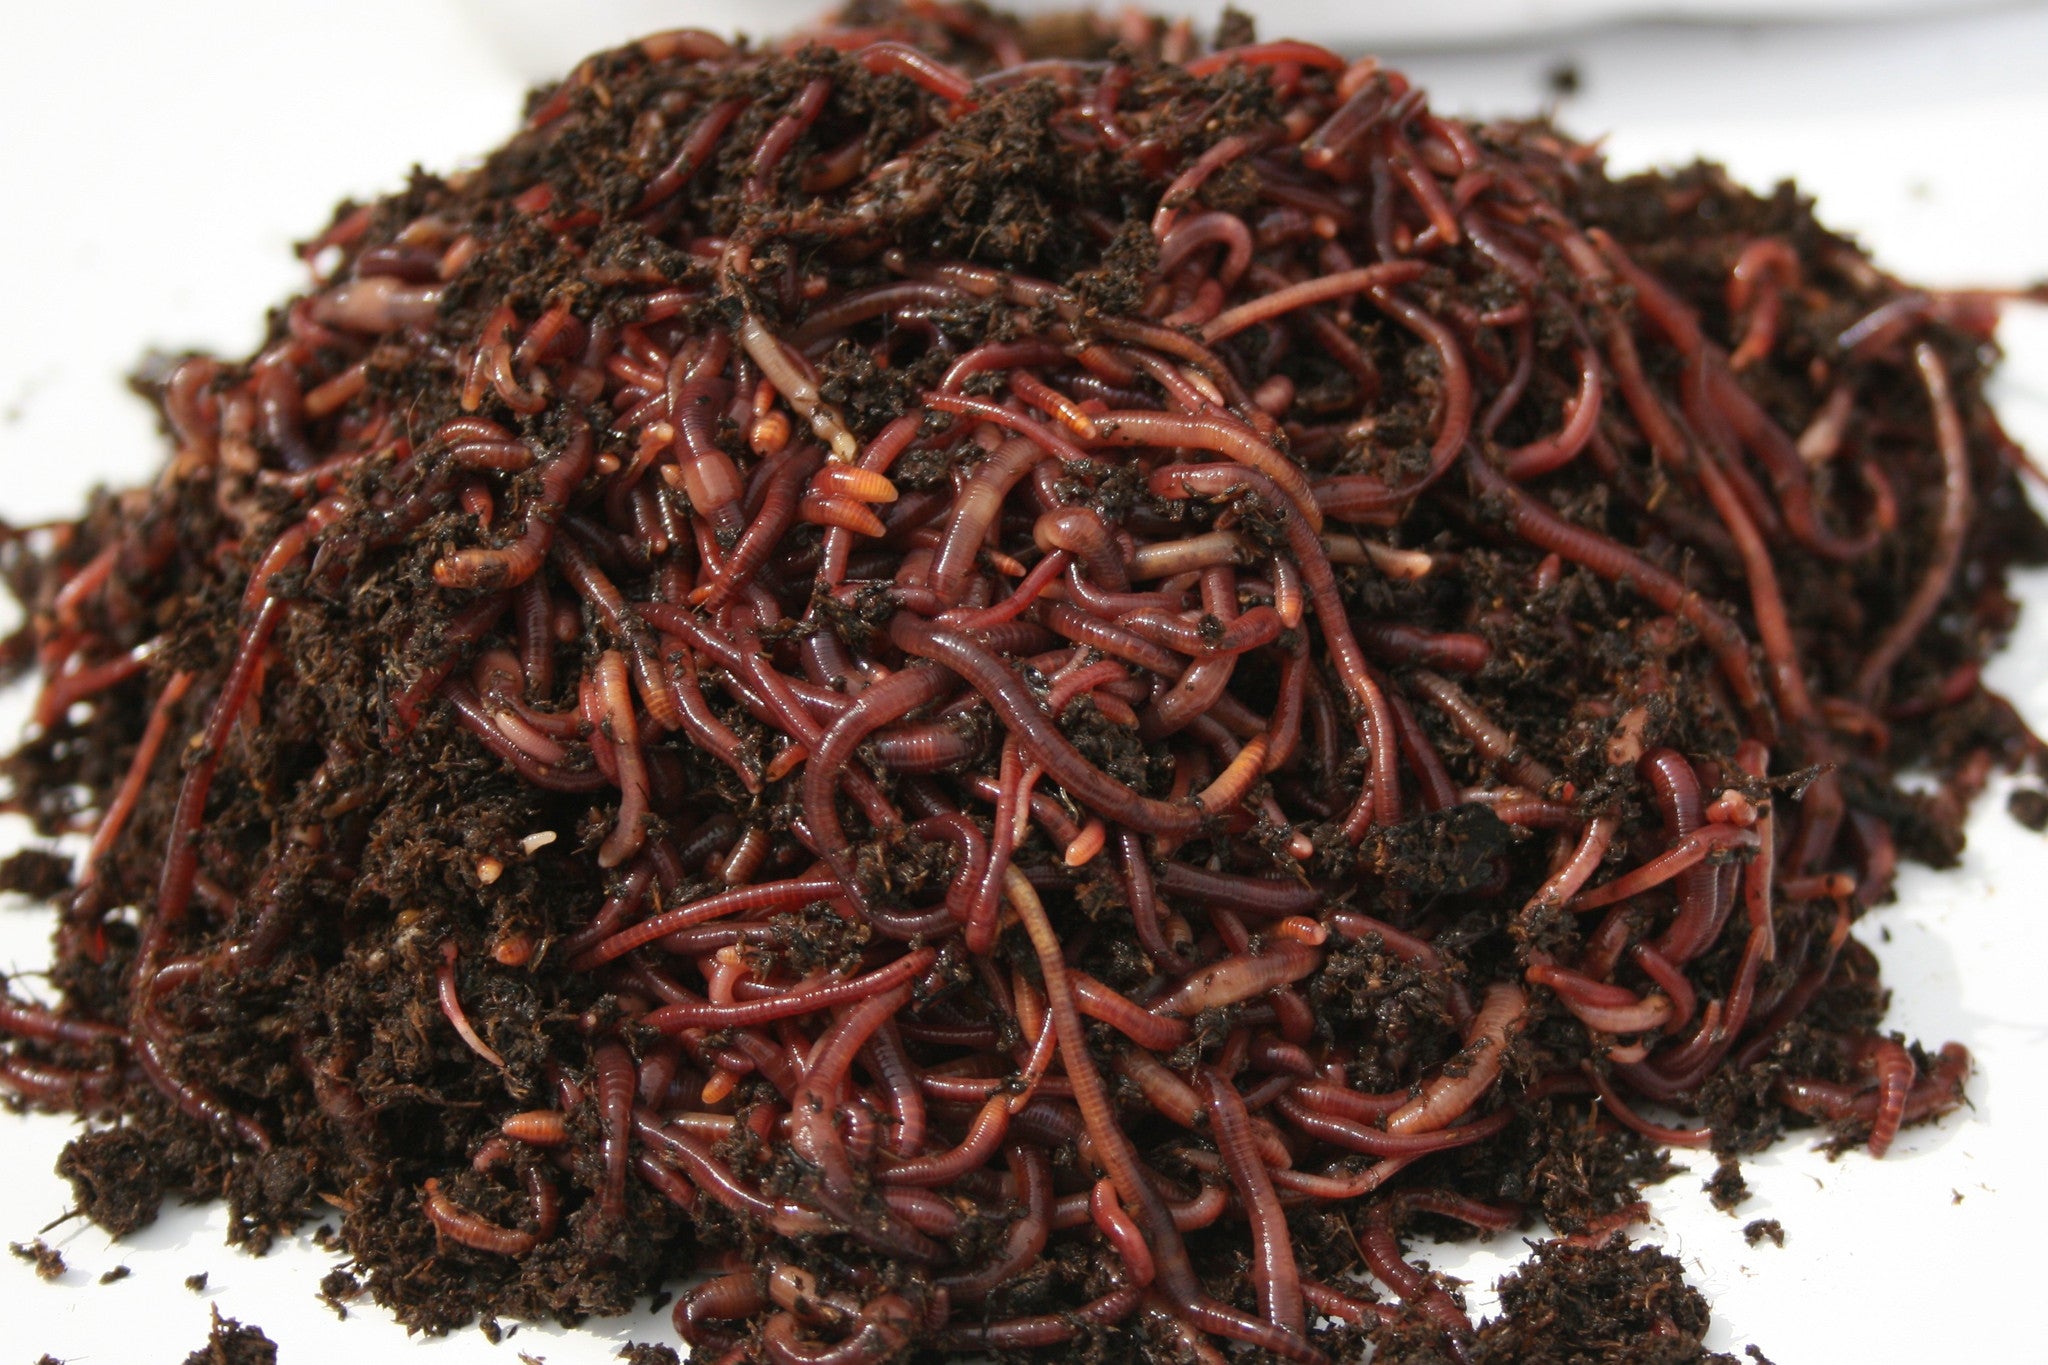 5,000 Composting Worms